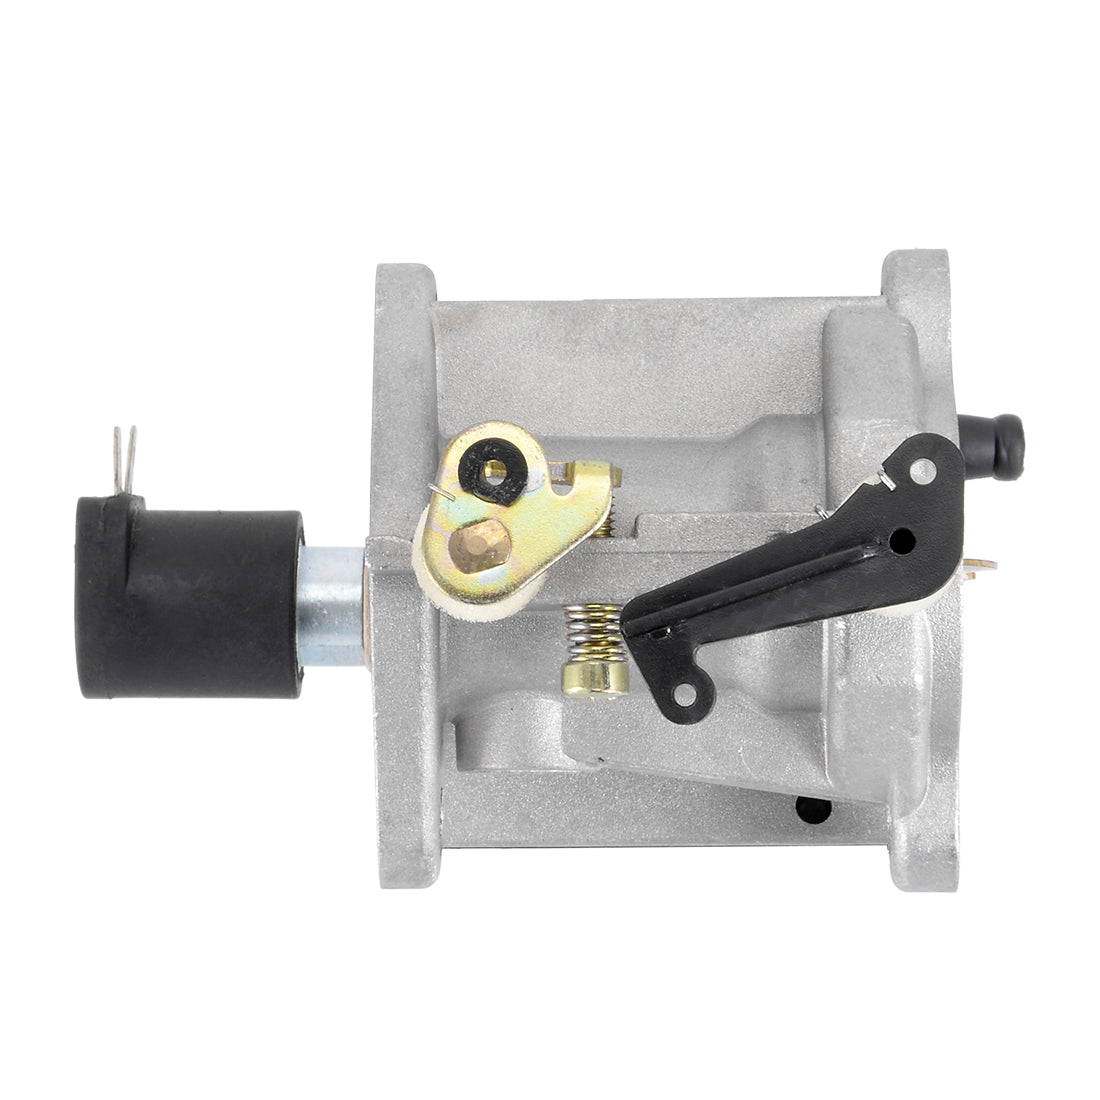 uxcell Uxcell 640330 Carburetor Carb for Tecumseh 640330A 640072A 640159 640034A OHV160 OHV165 OHV170 OHV175 OHV180 with Gasket